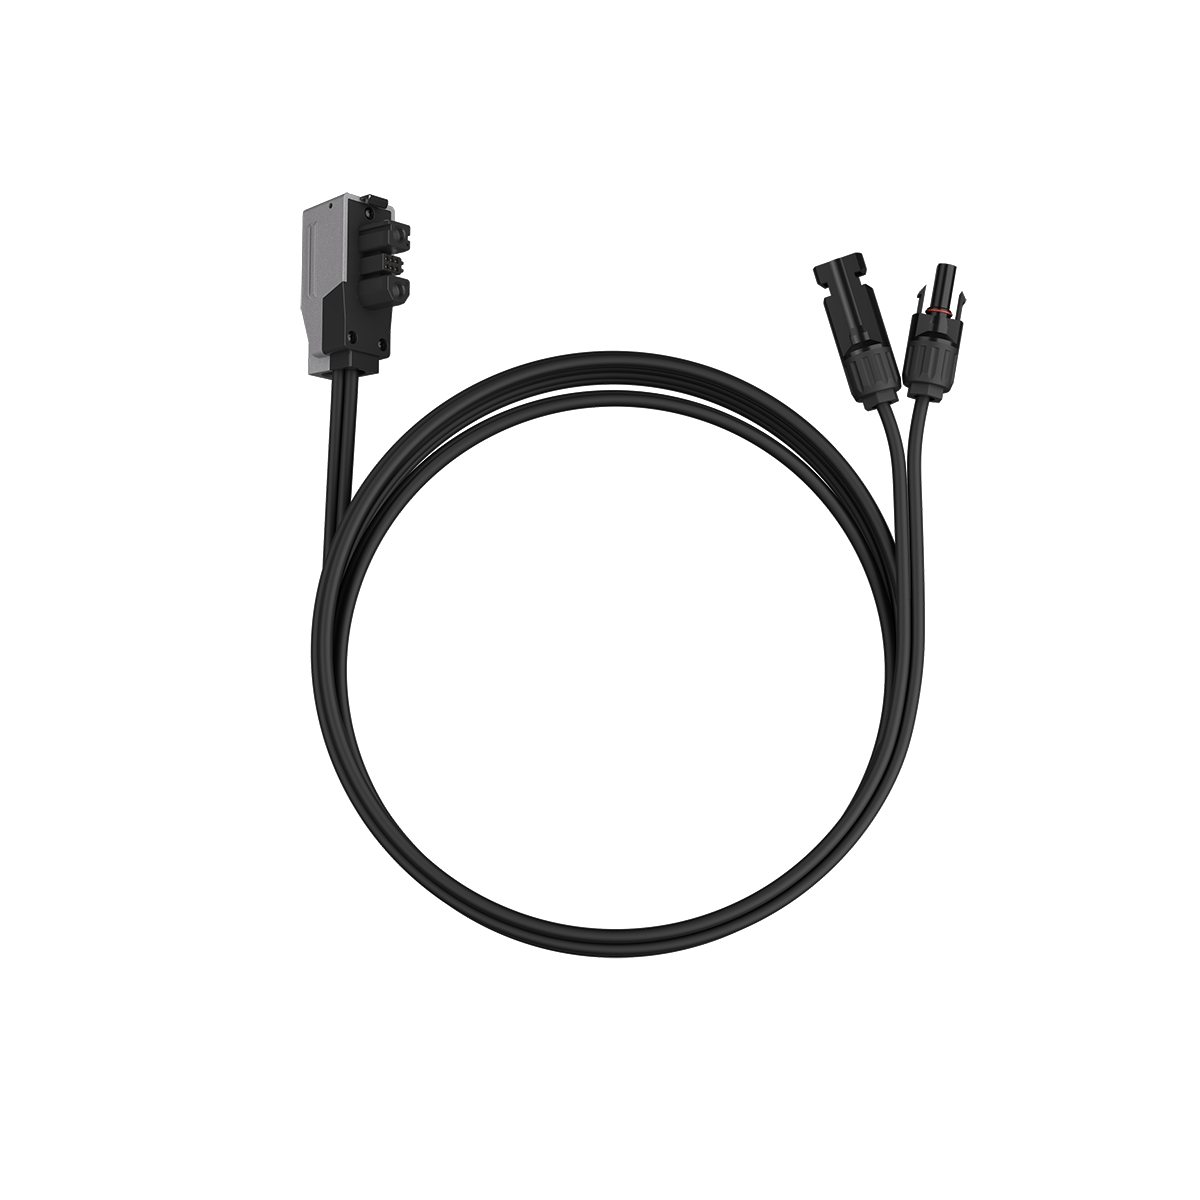 Ecoflow - Connecting cable from Powerstream to River 2 - Drone Parts Center